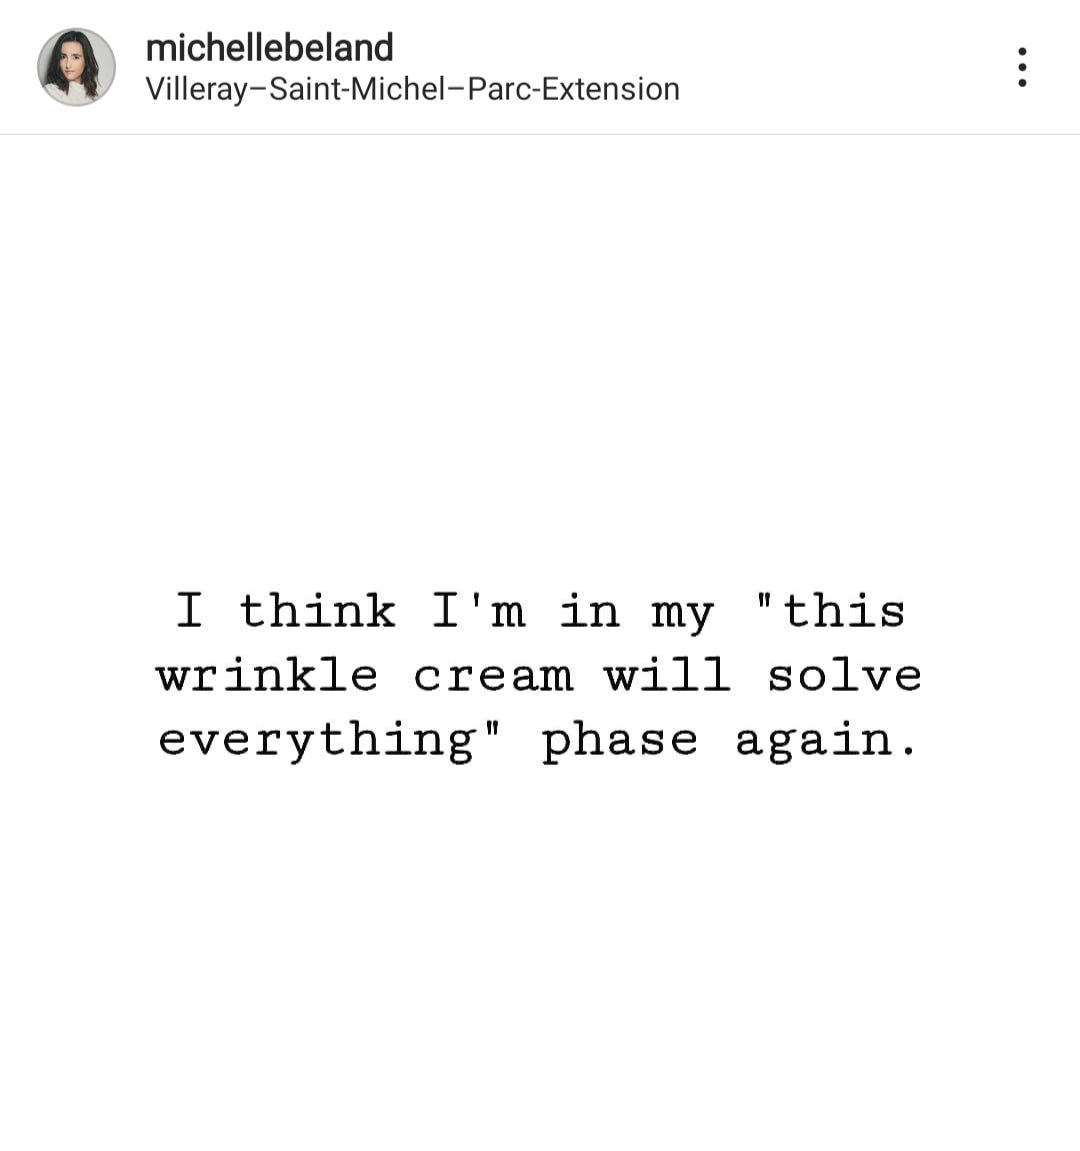 an instagram post by Michelle Béland that reads "I think I'm in my this wrinkle cream will solve everything phase again."